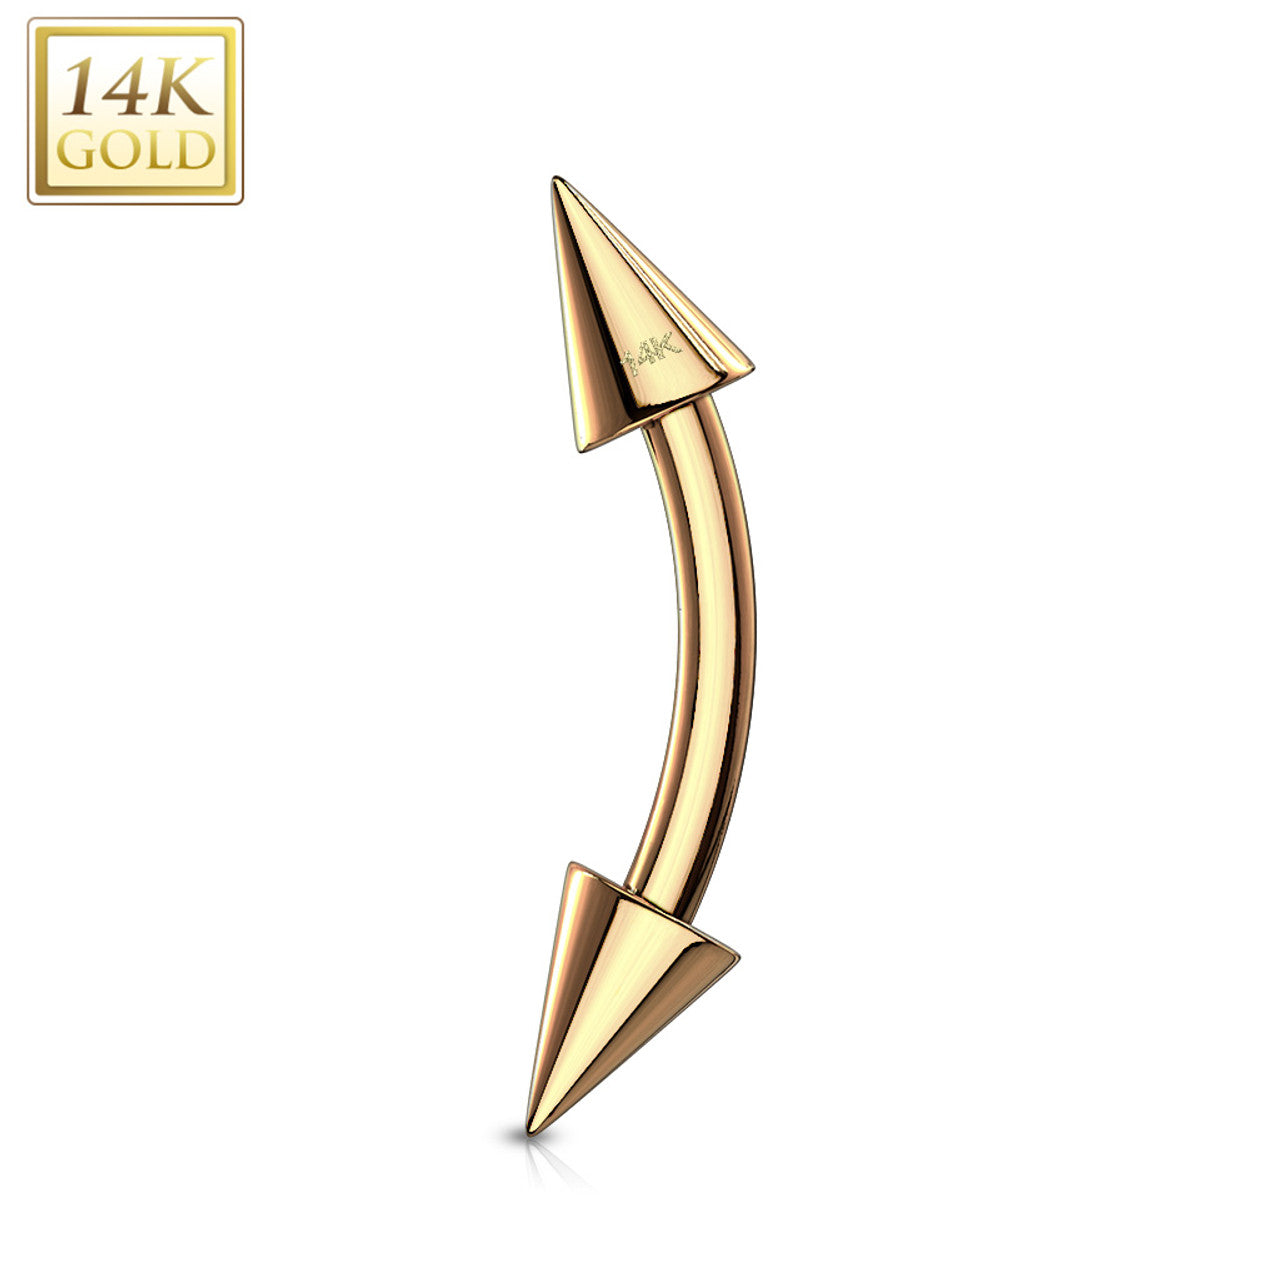 14 Karat Gold Curved Barbell 16 Gauge Eyebrow Ring With Spike Ends